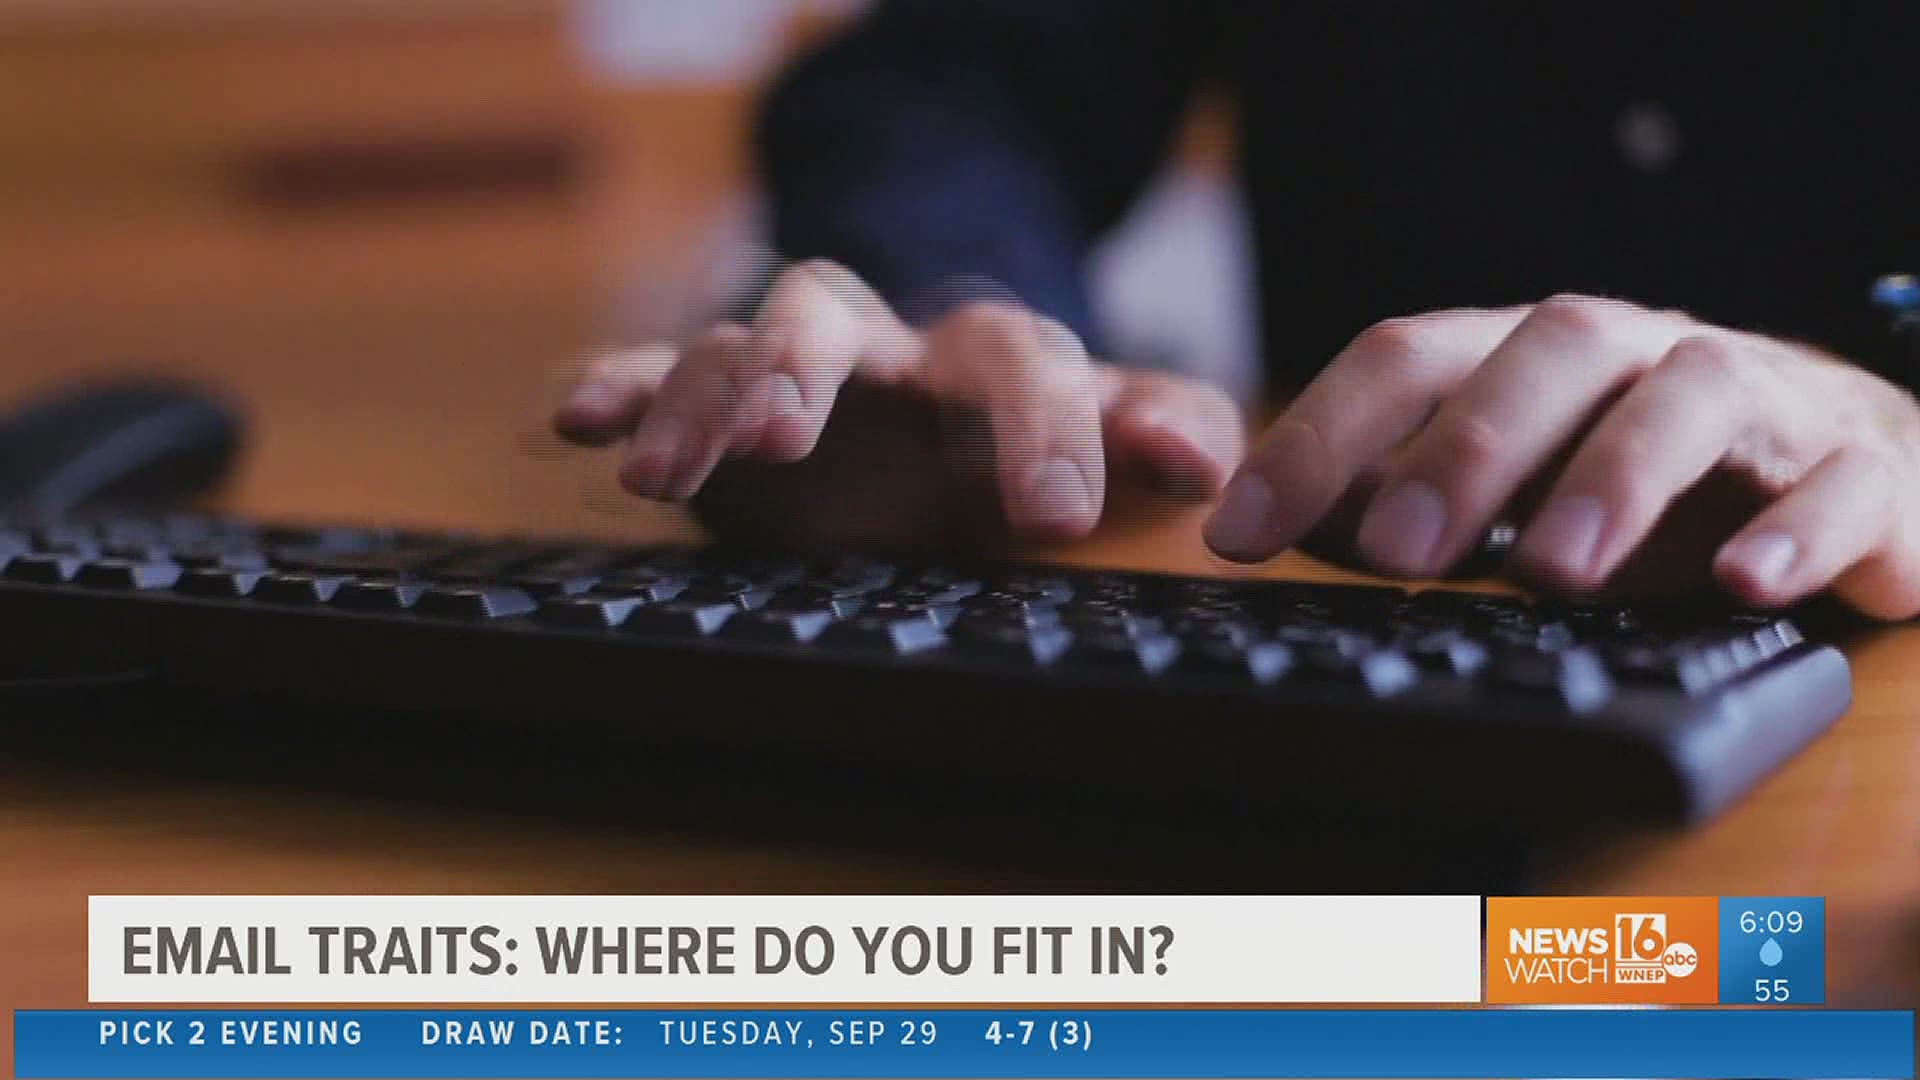 If you use email while working from home, there's something you may want to consider before hitting send. Newswatch 16's Ryan Leckey explains.